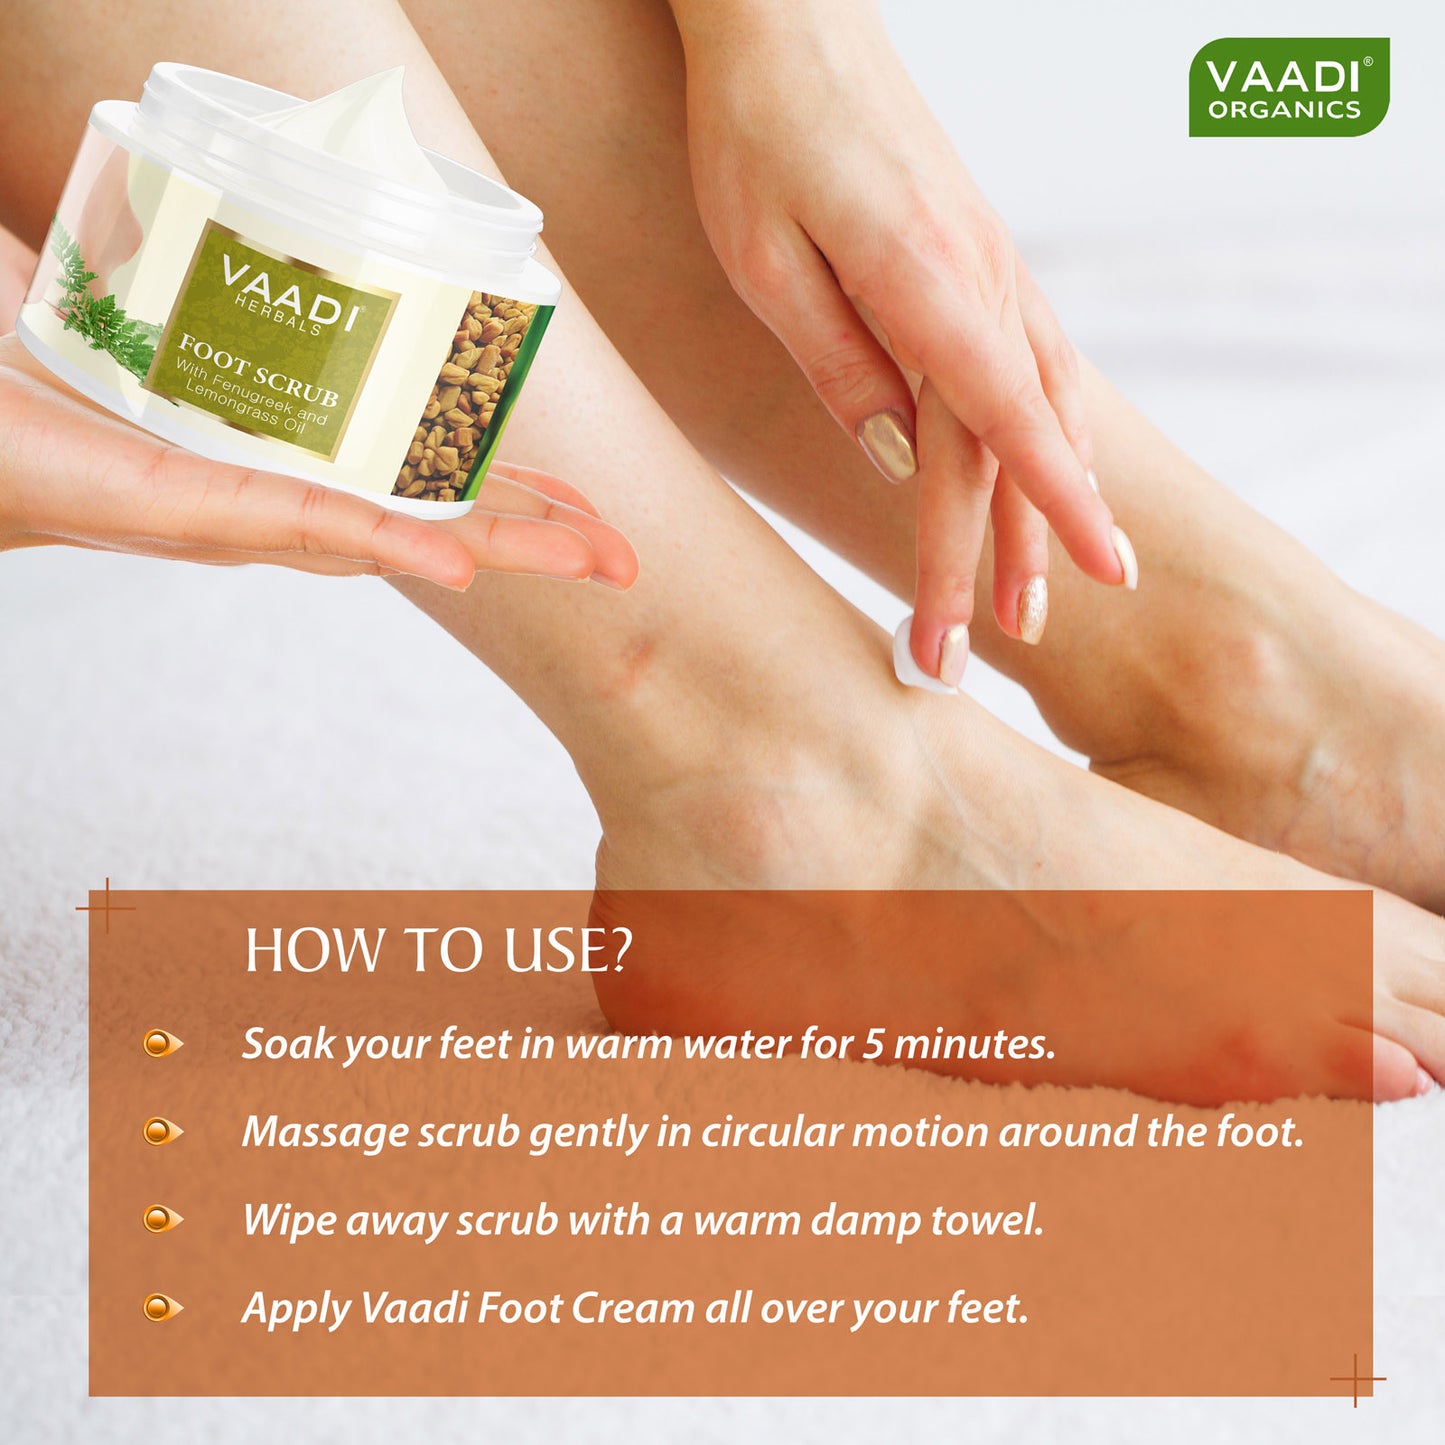 Foot Scrub With Fenugreek And Lemongrass Oil (500 gms)